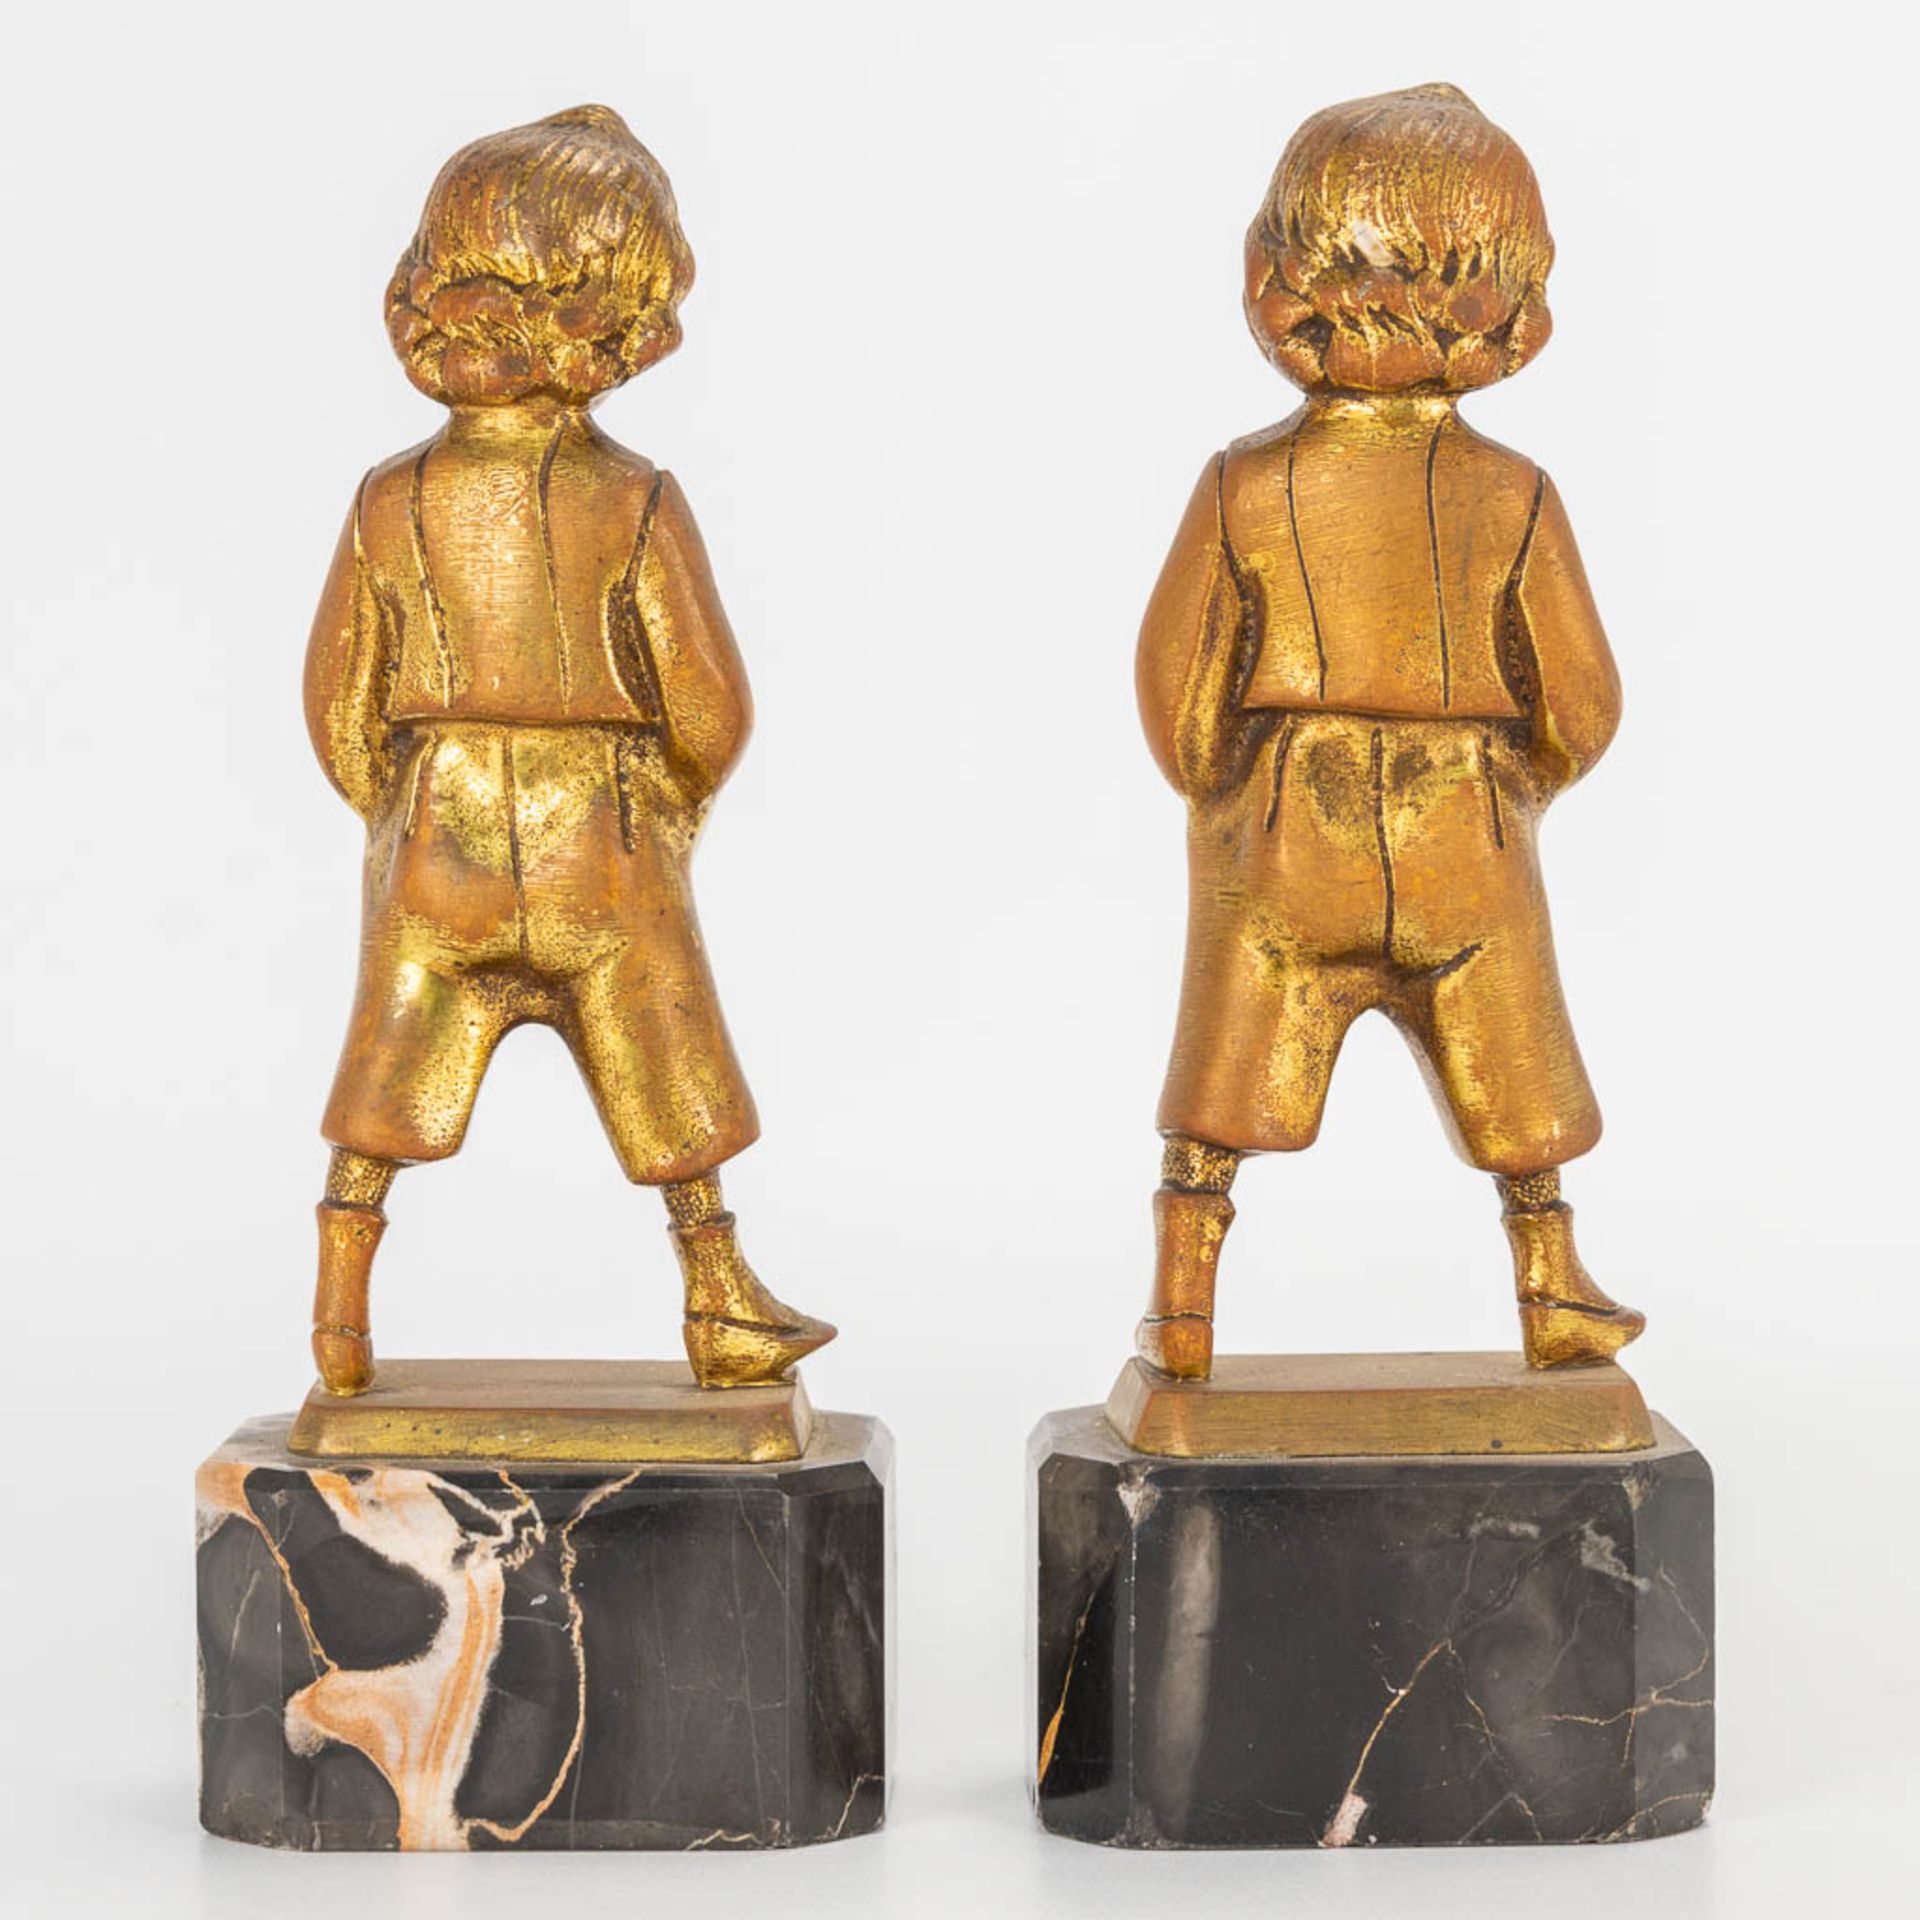 A collection of 10 bronze and spelter figurines and objects. (H:23cm) - Image 7 of 12